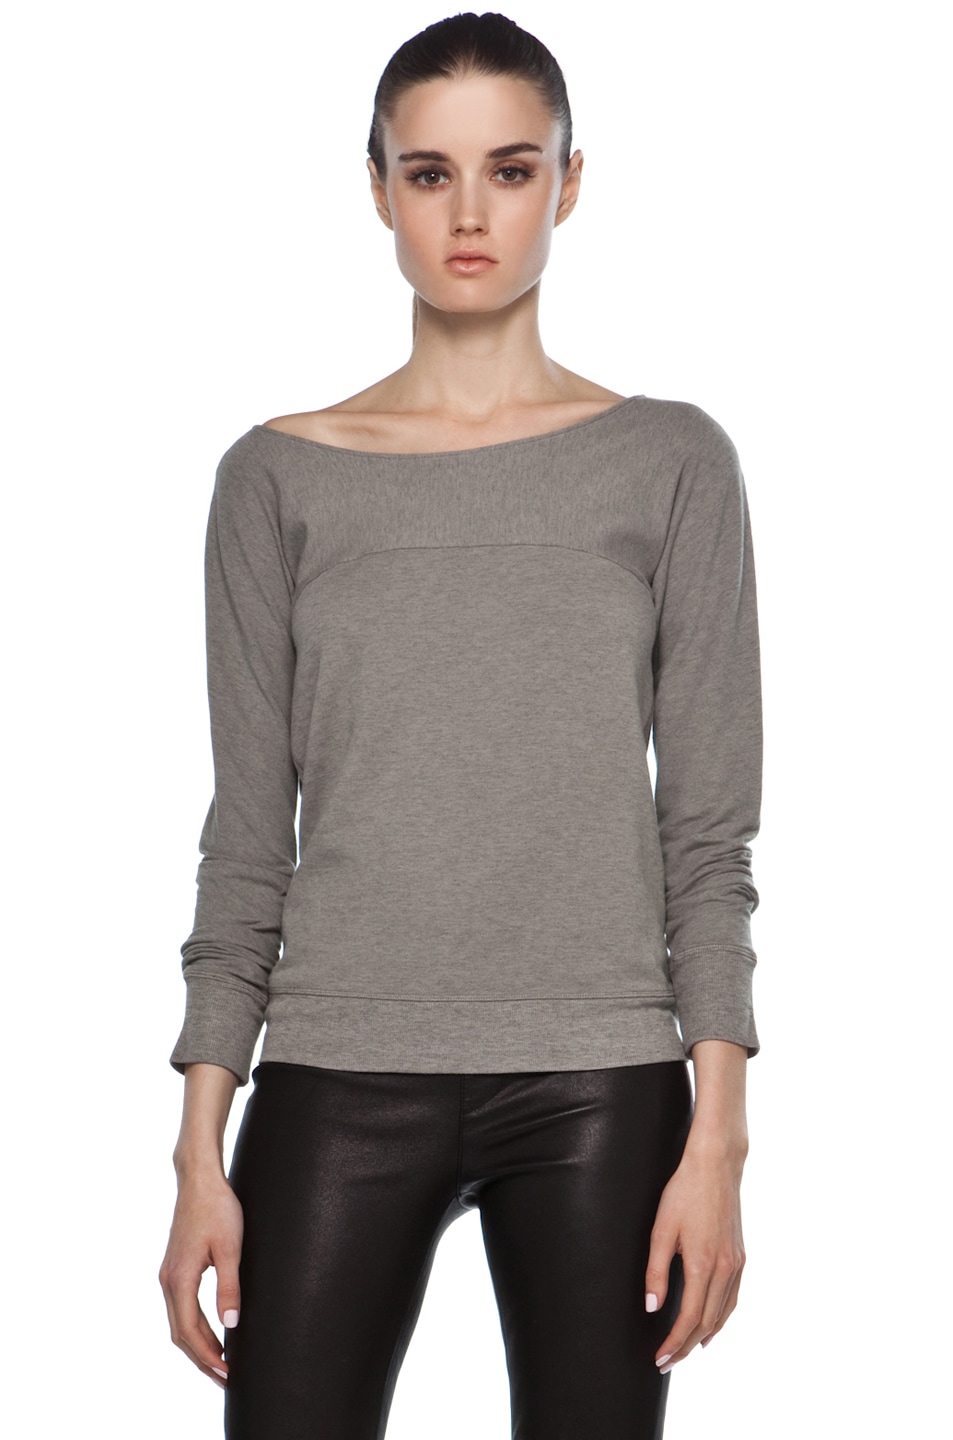 MM6 Maison Margiela Long Sleeve with Cut Out in Grey | FWRD